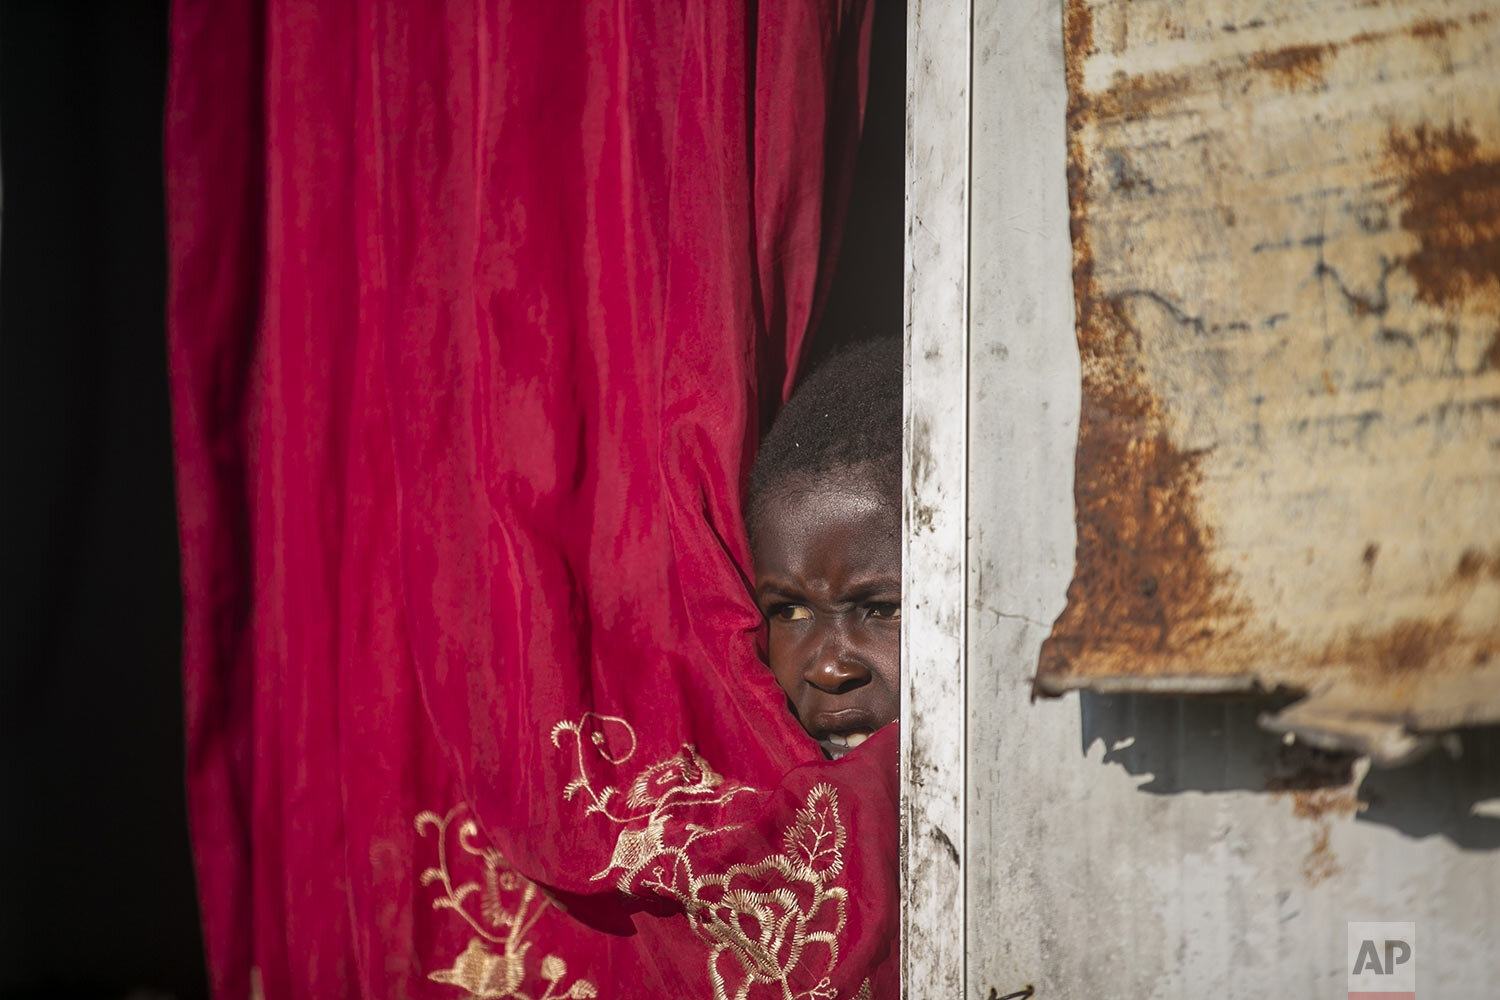  Jonelson Princeton, 7, who survived cholera as a newborn, peers out from inside his home which was once used as an office, on a former UN base where he lives with his parents and grandmother in Mirebalais, Haiti, Oct. 19, 2020. (AP Photo/Dieu Nalio 